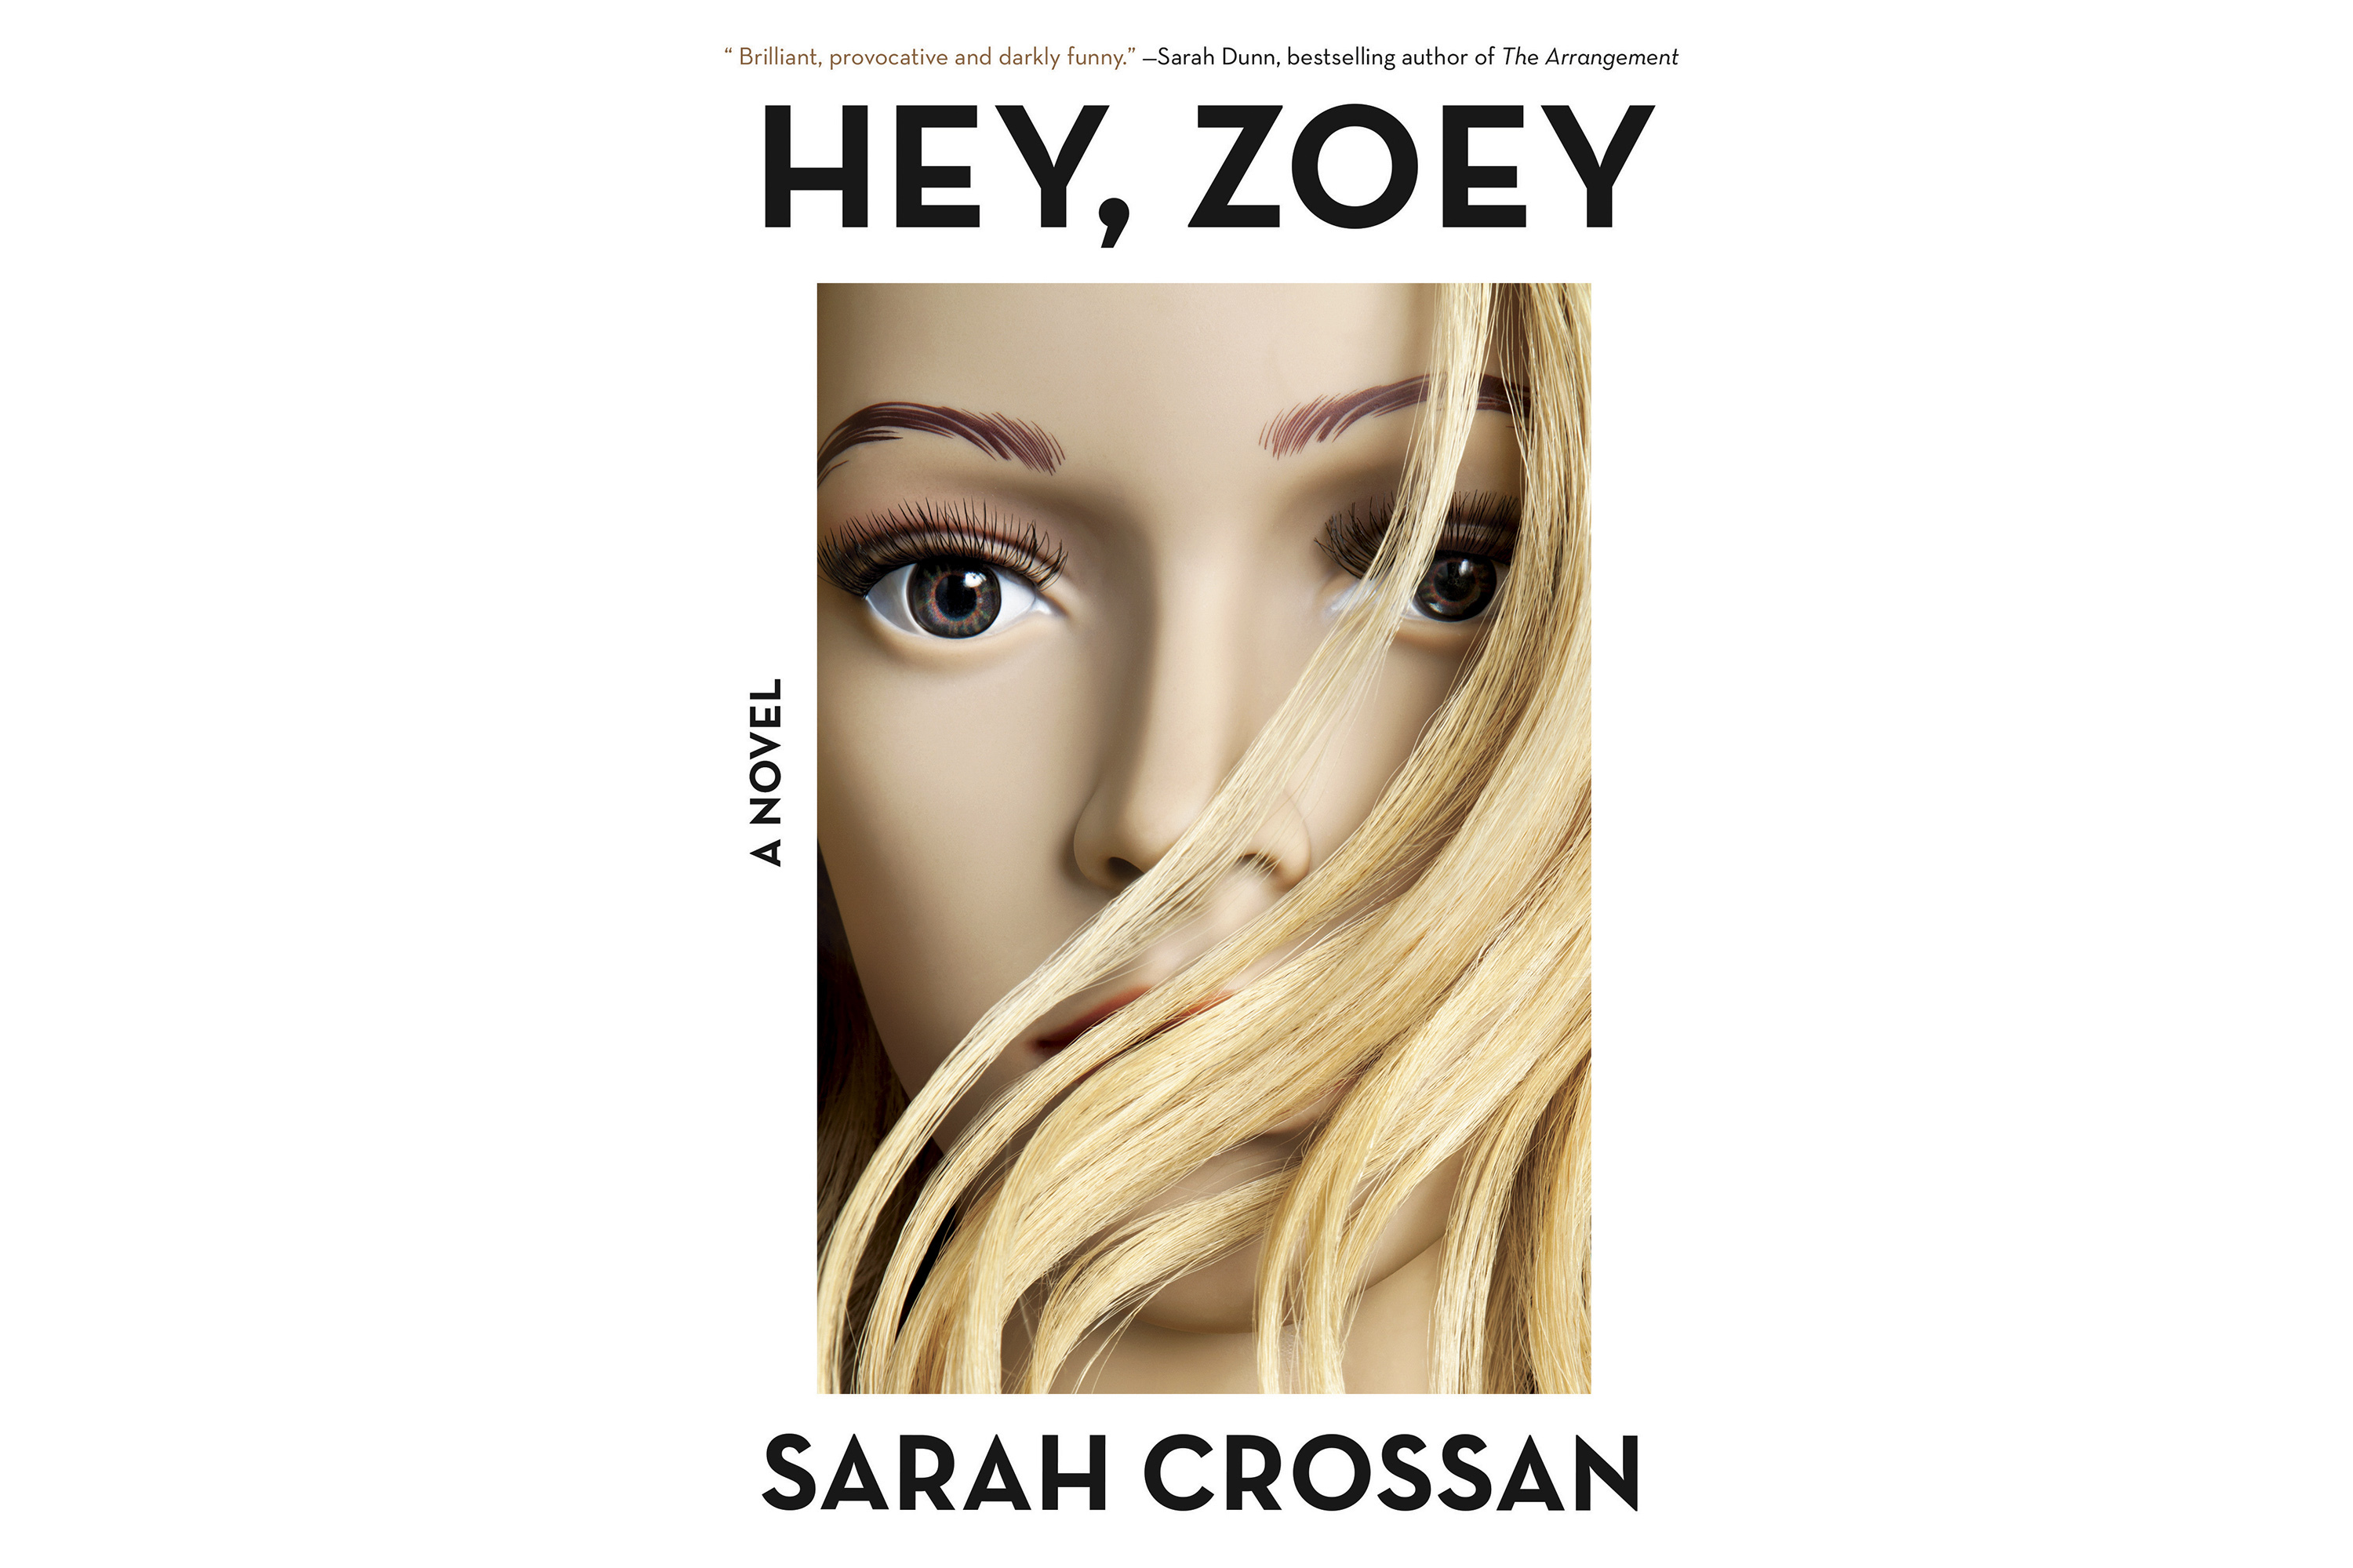 This cover image released by Little, Brown and Company shows "Hey, Zoey" by Sarah Crossan. (Little, Brown and Company via AP)